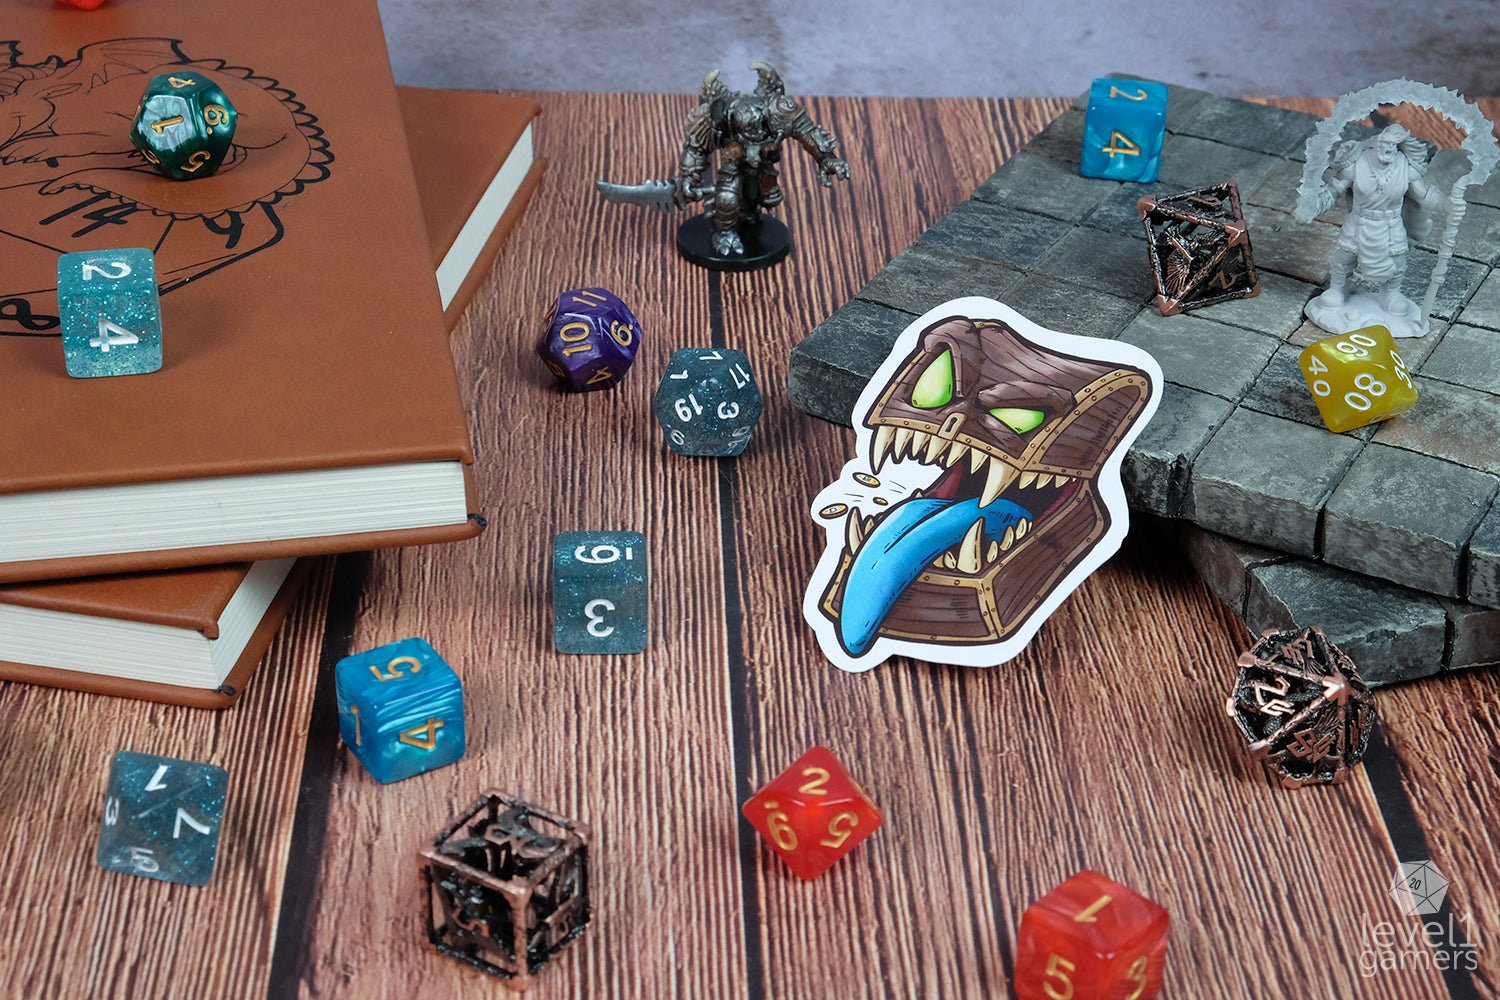 Mimic Chest Sticker – Level 1 Gamers